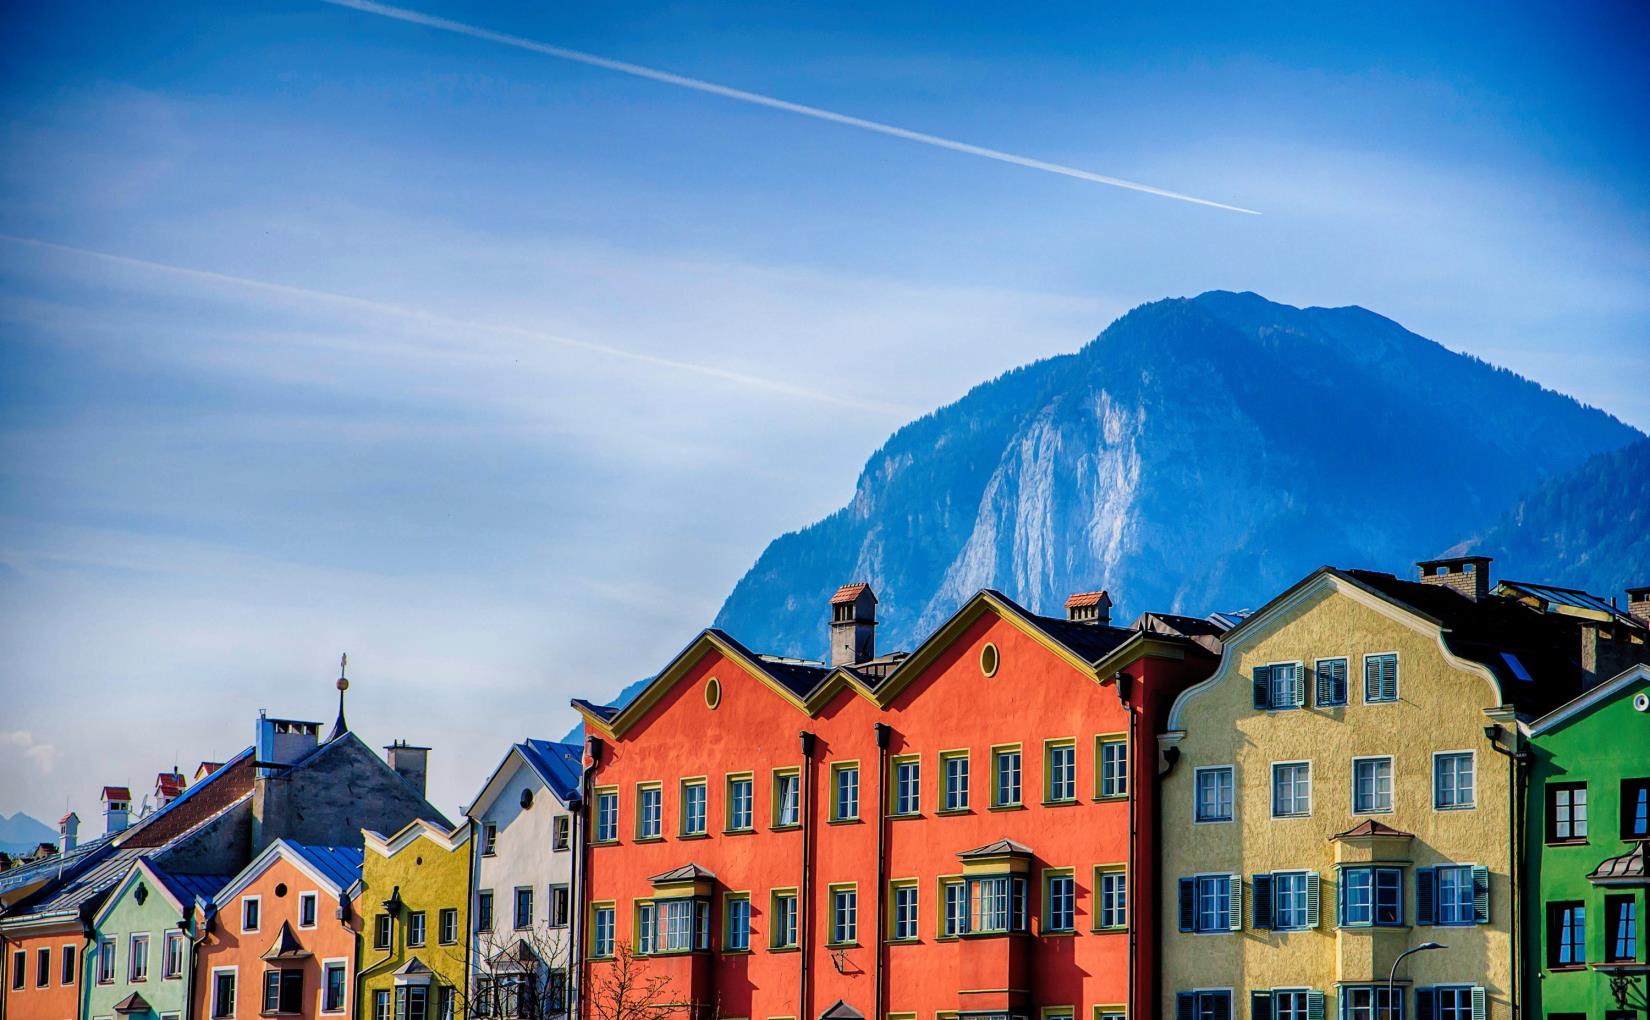 A line of colorful buildings in Old Town Innsbruck, Austria, Oct. 18, 2018. (Getty Images Photo)